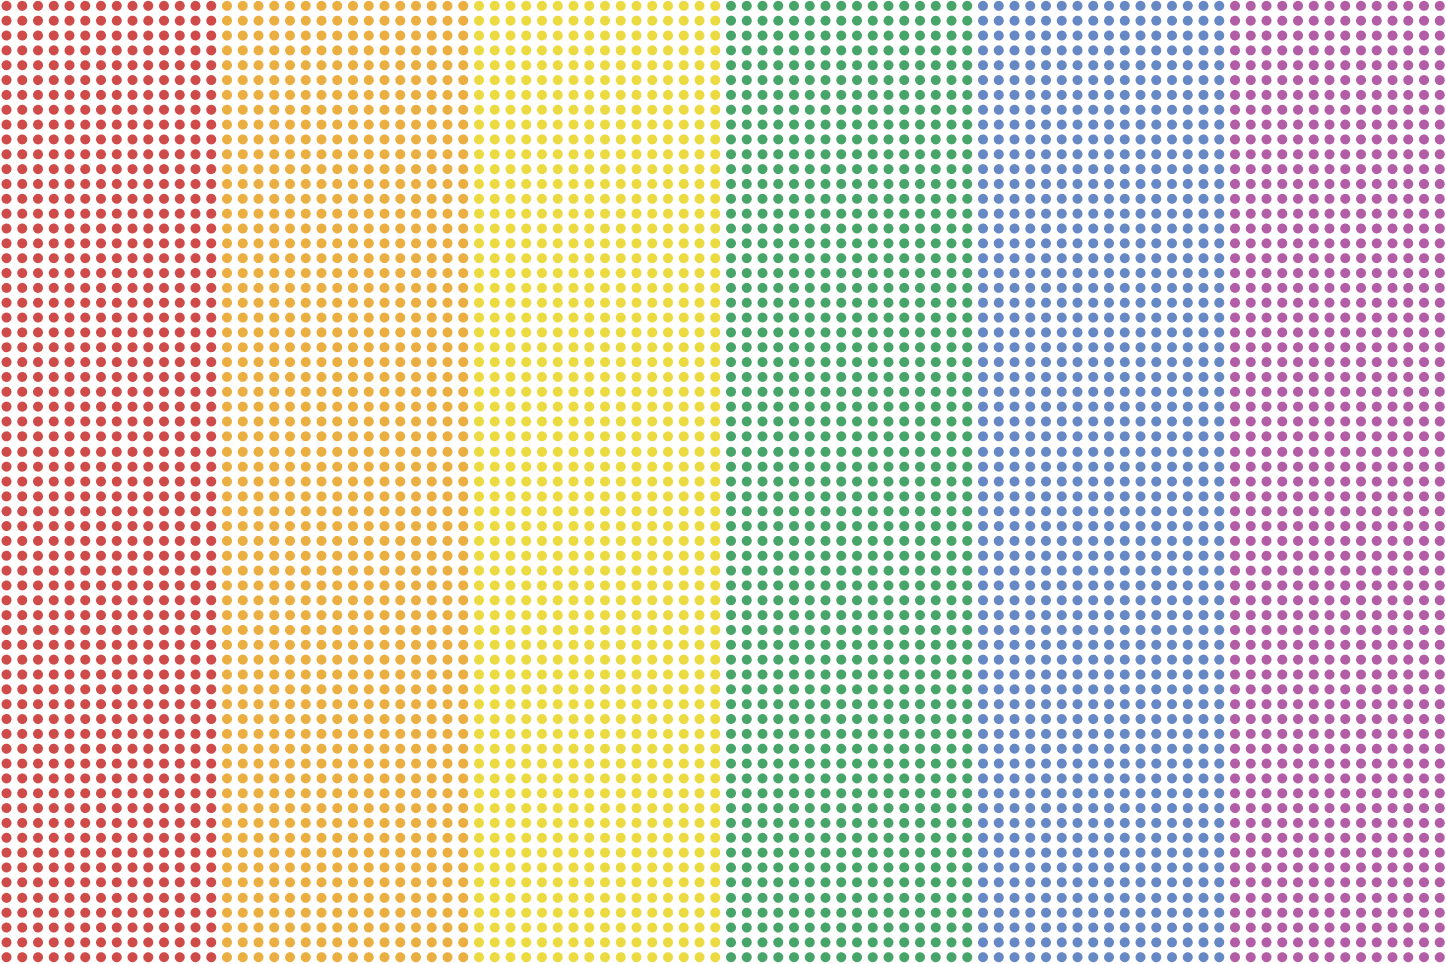 A rectangular grid of dots in the colors of the rainbow